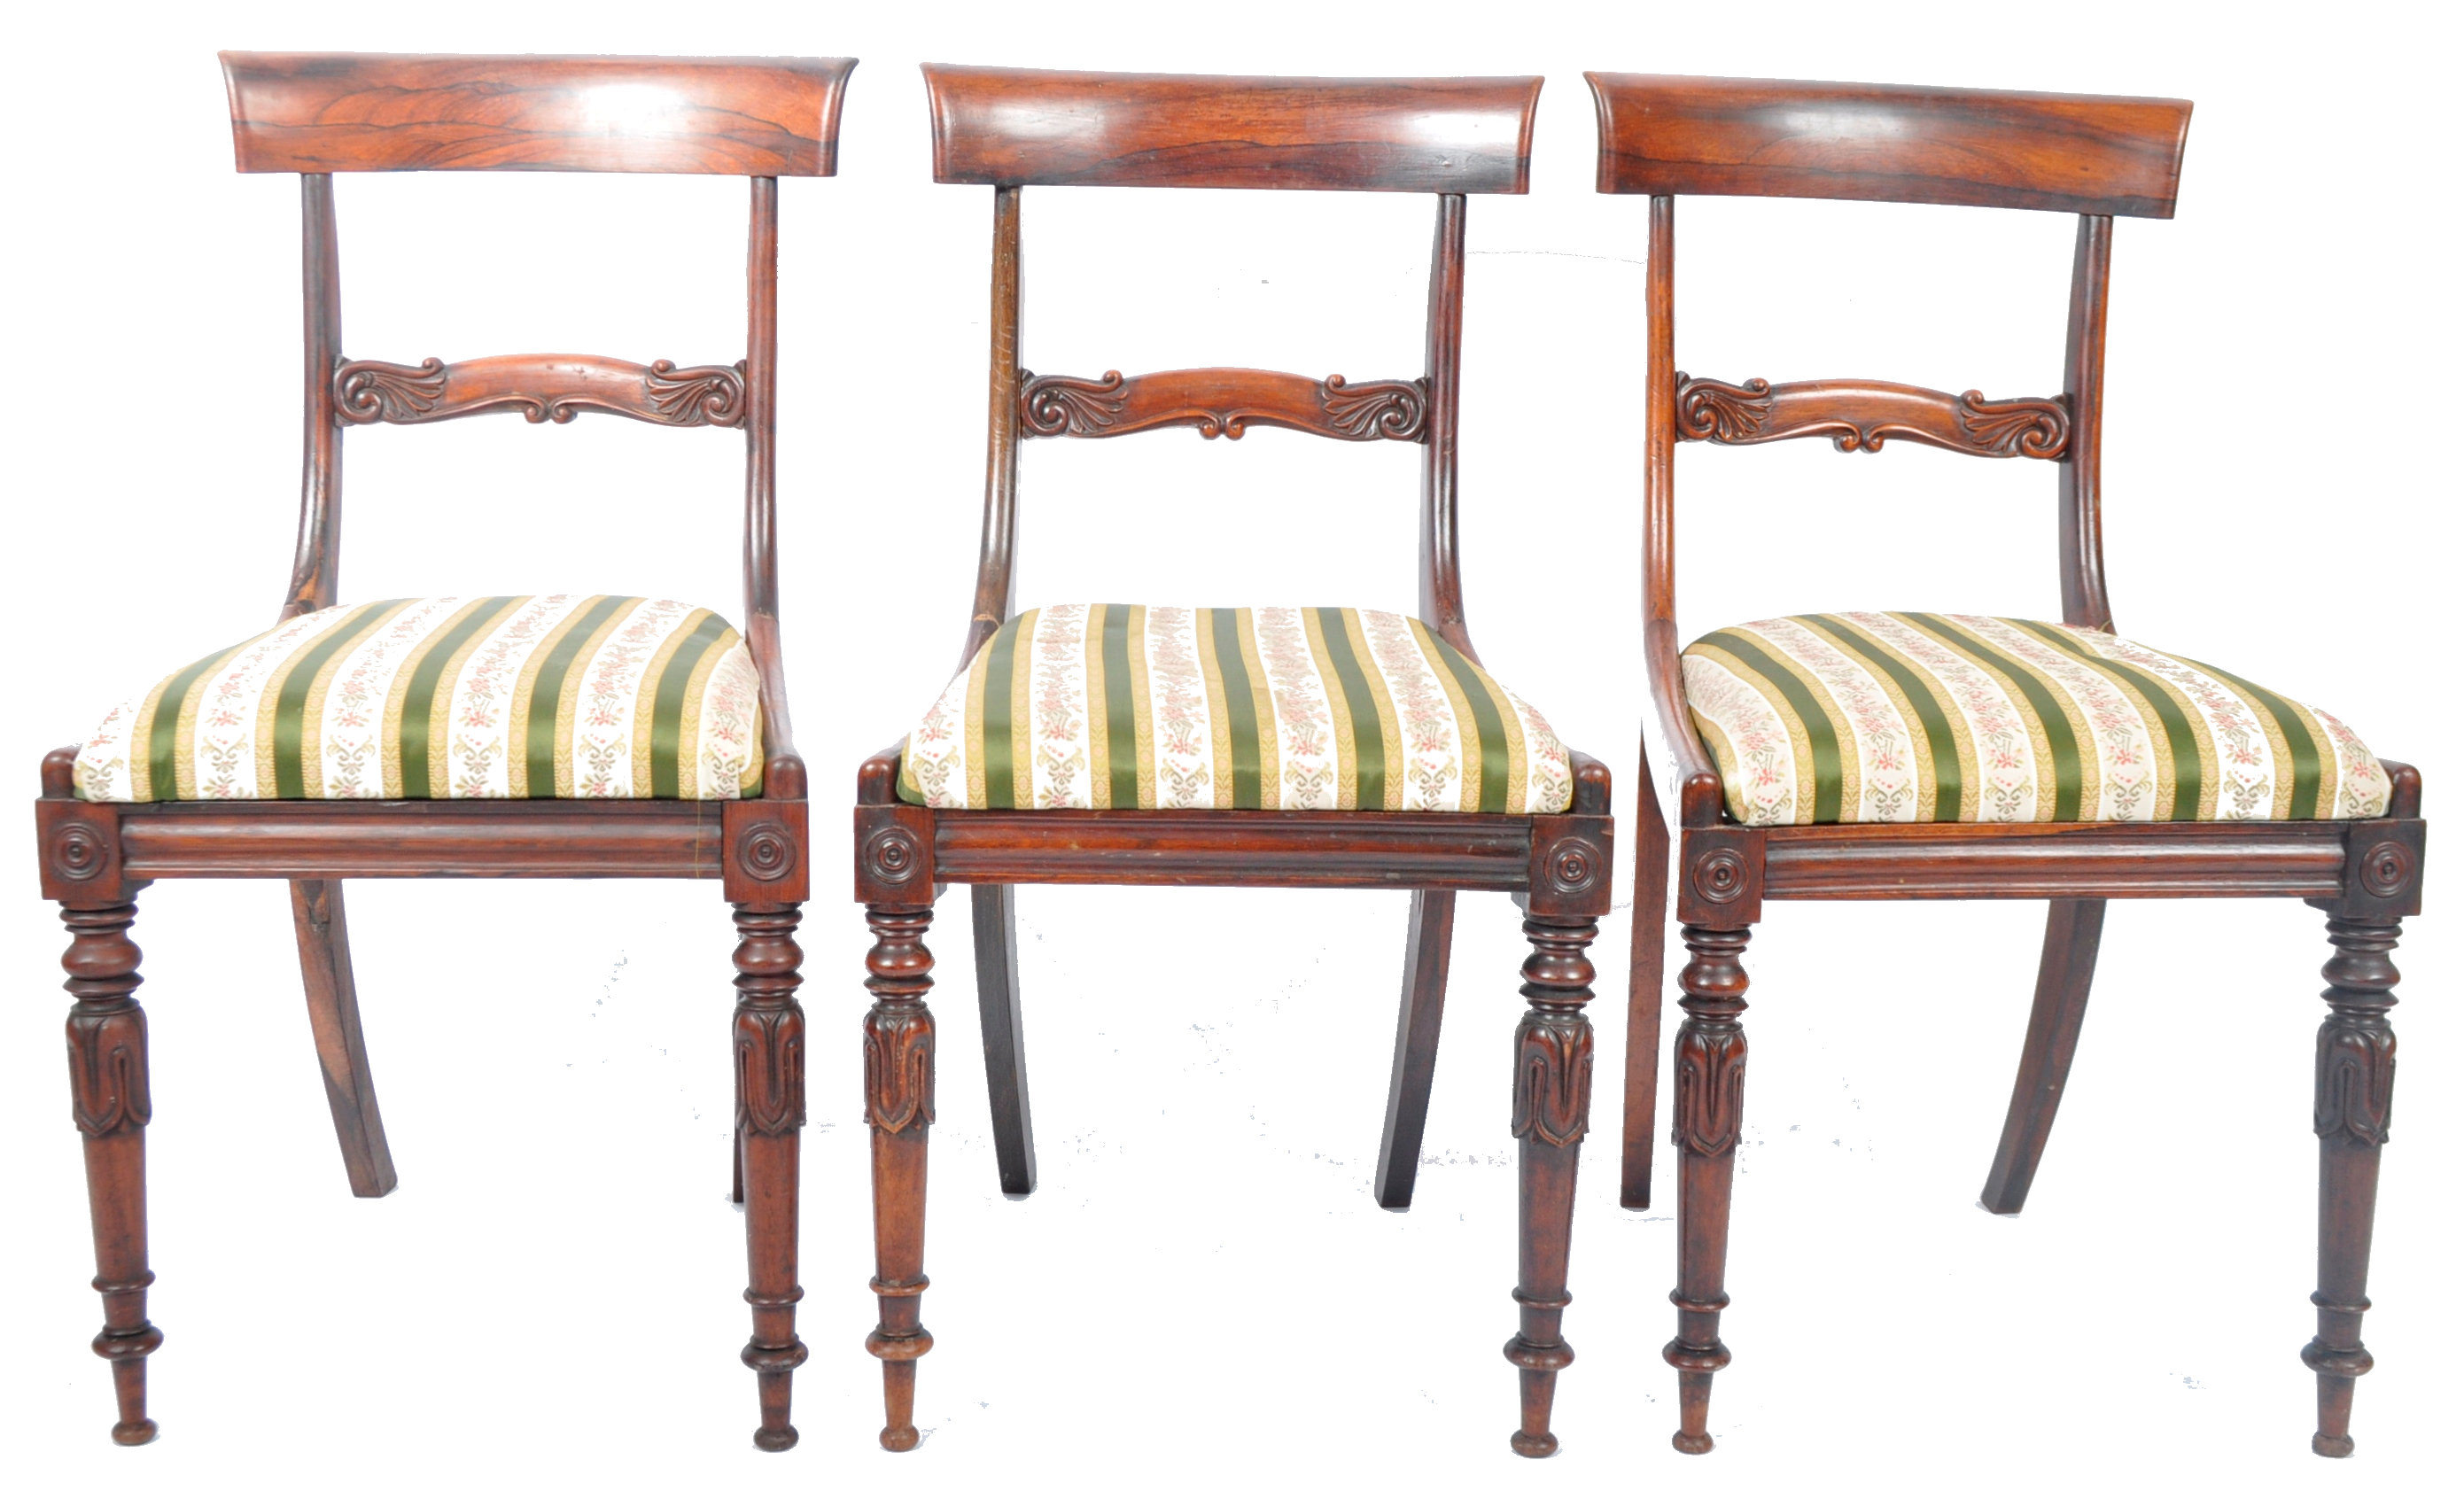 SET OF SIX ANTIQUE ROSEWOOD DINING CHAIRS IN THE GILLOWS STYLE - Image 12 of 12